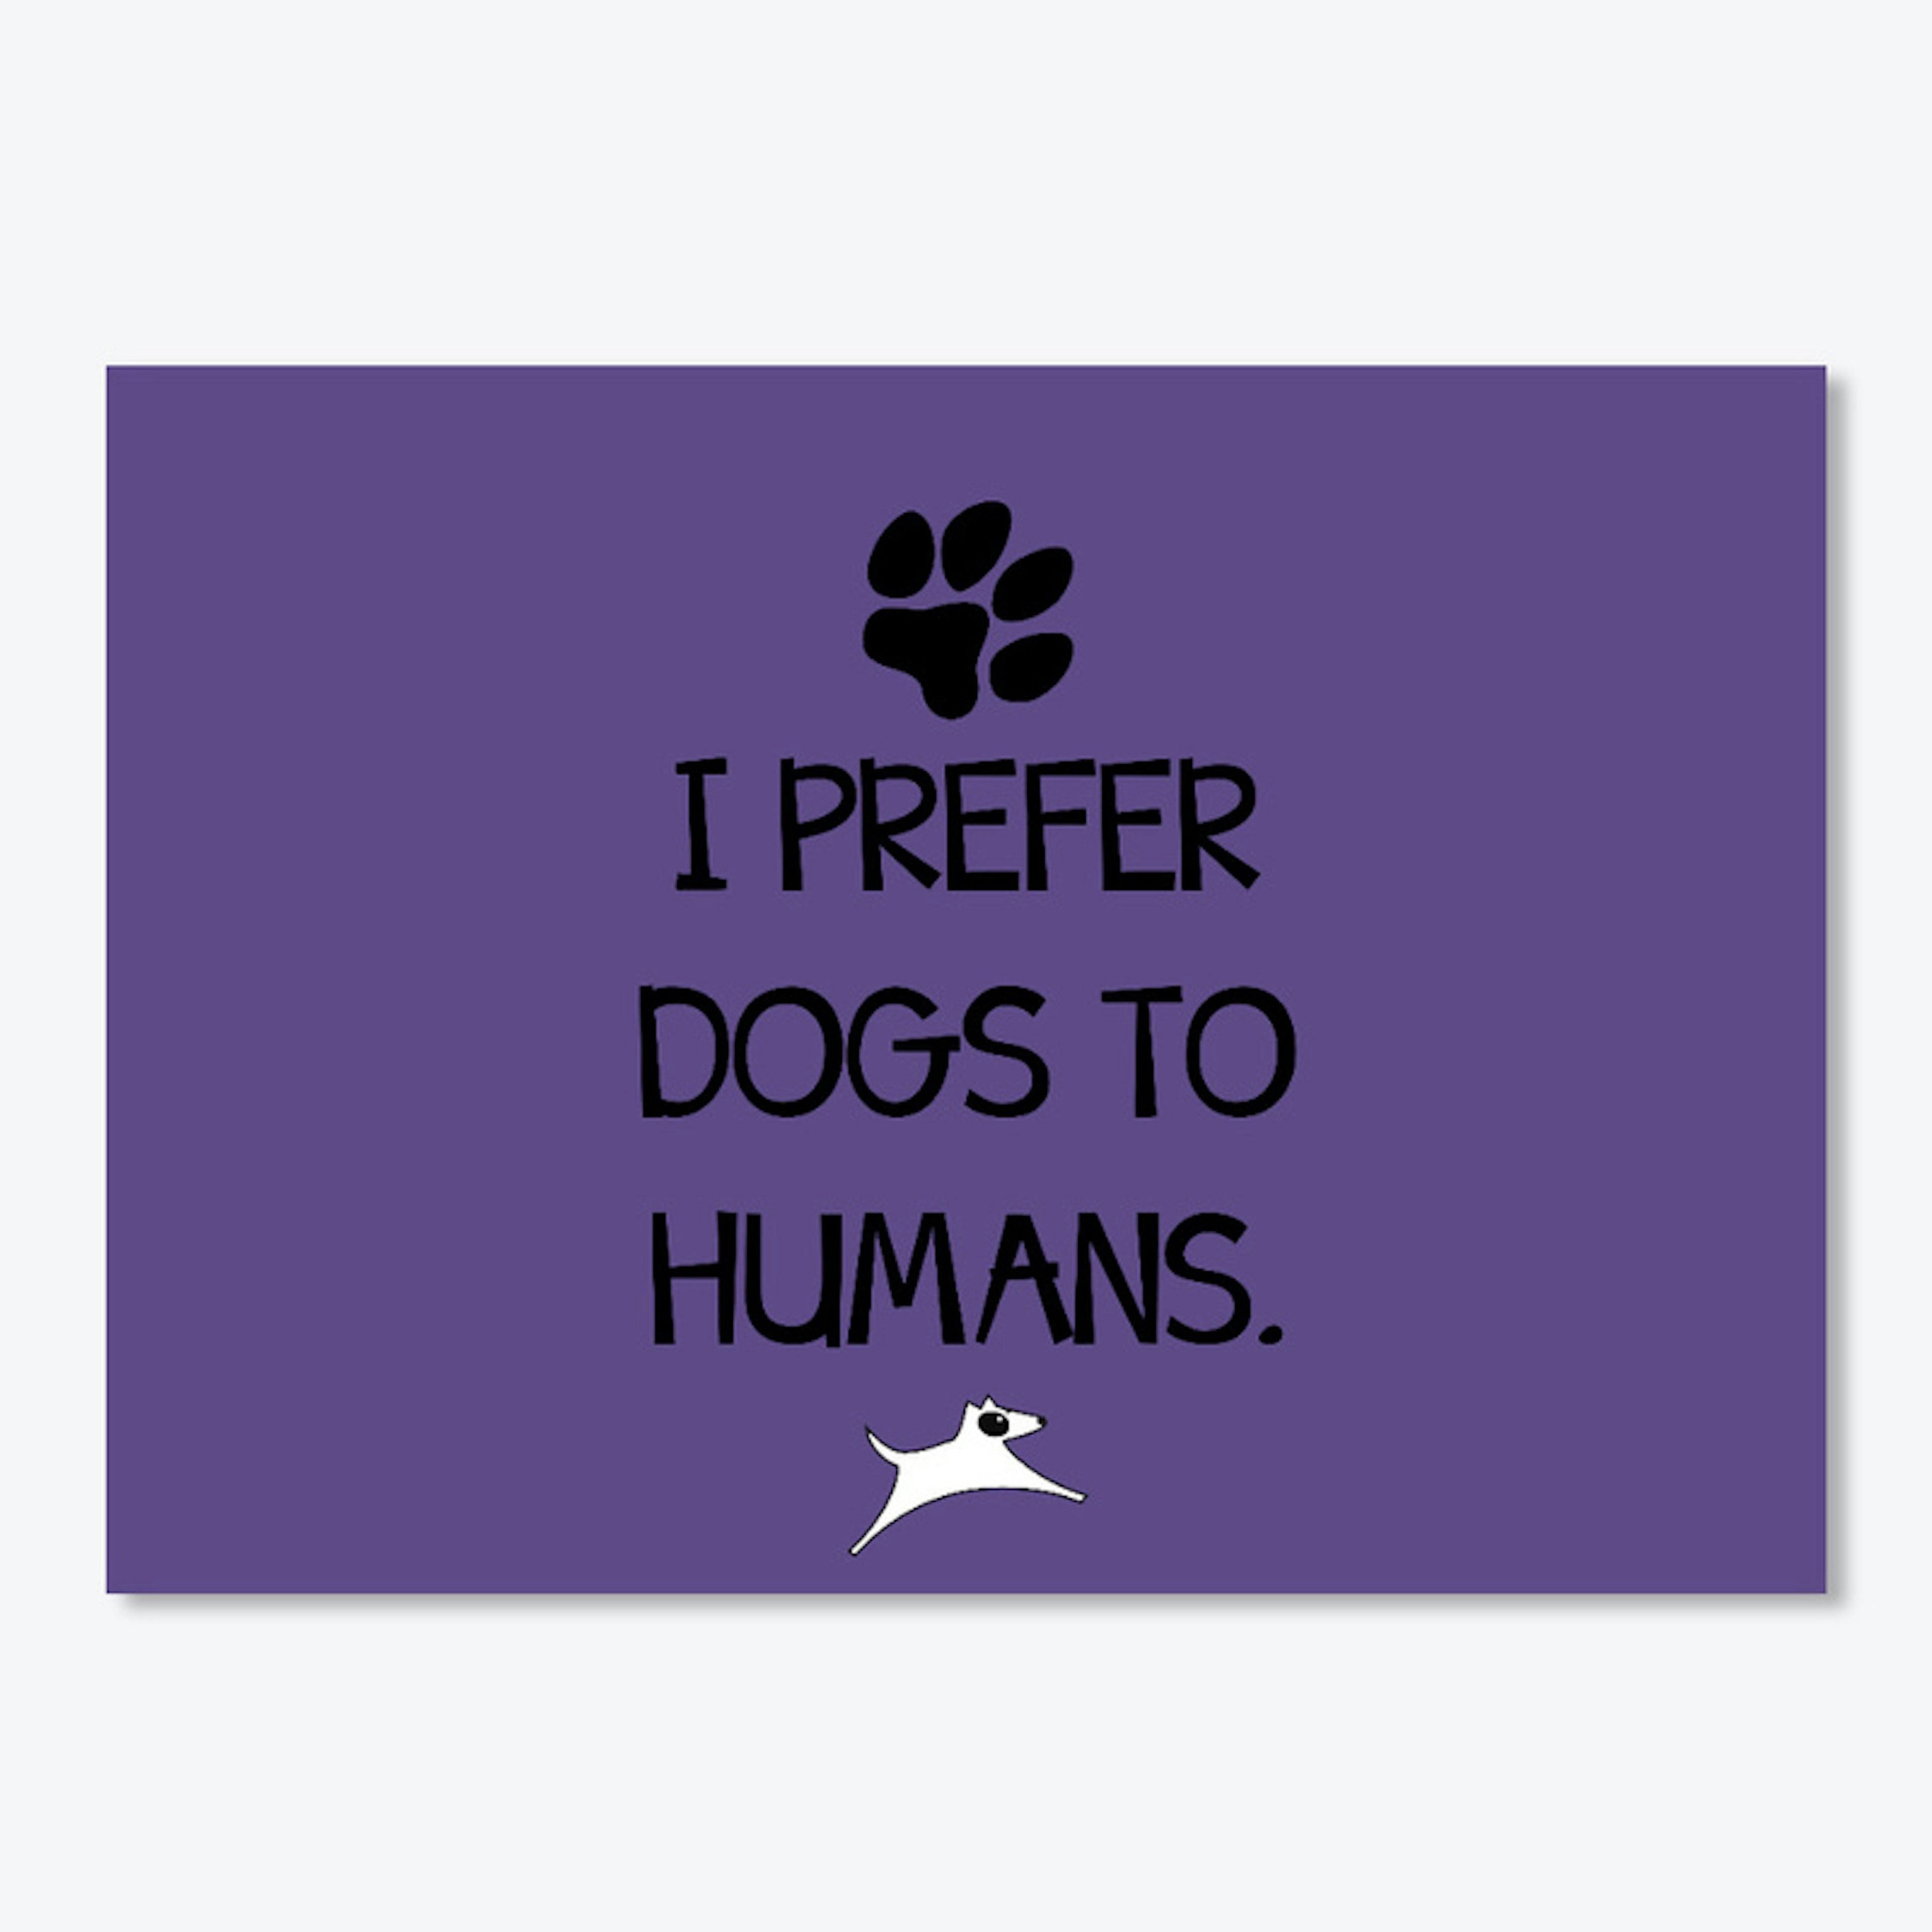 Prefers Dogs to Humans